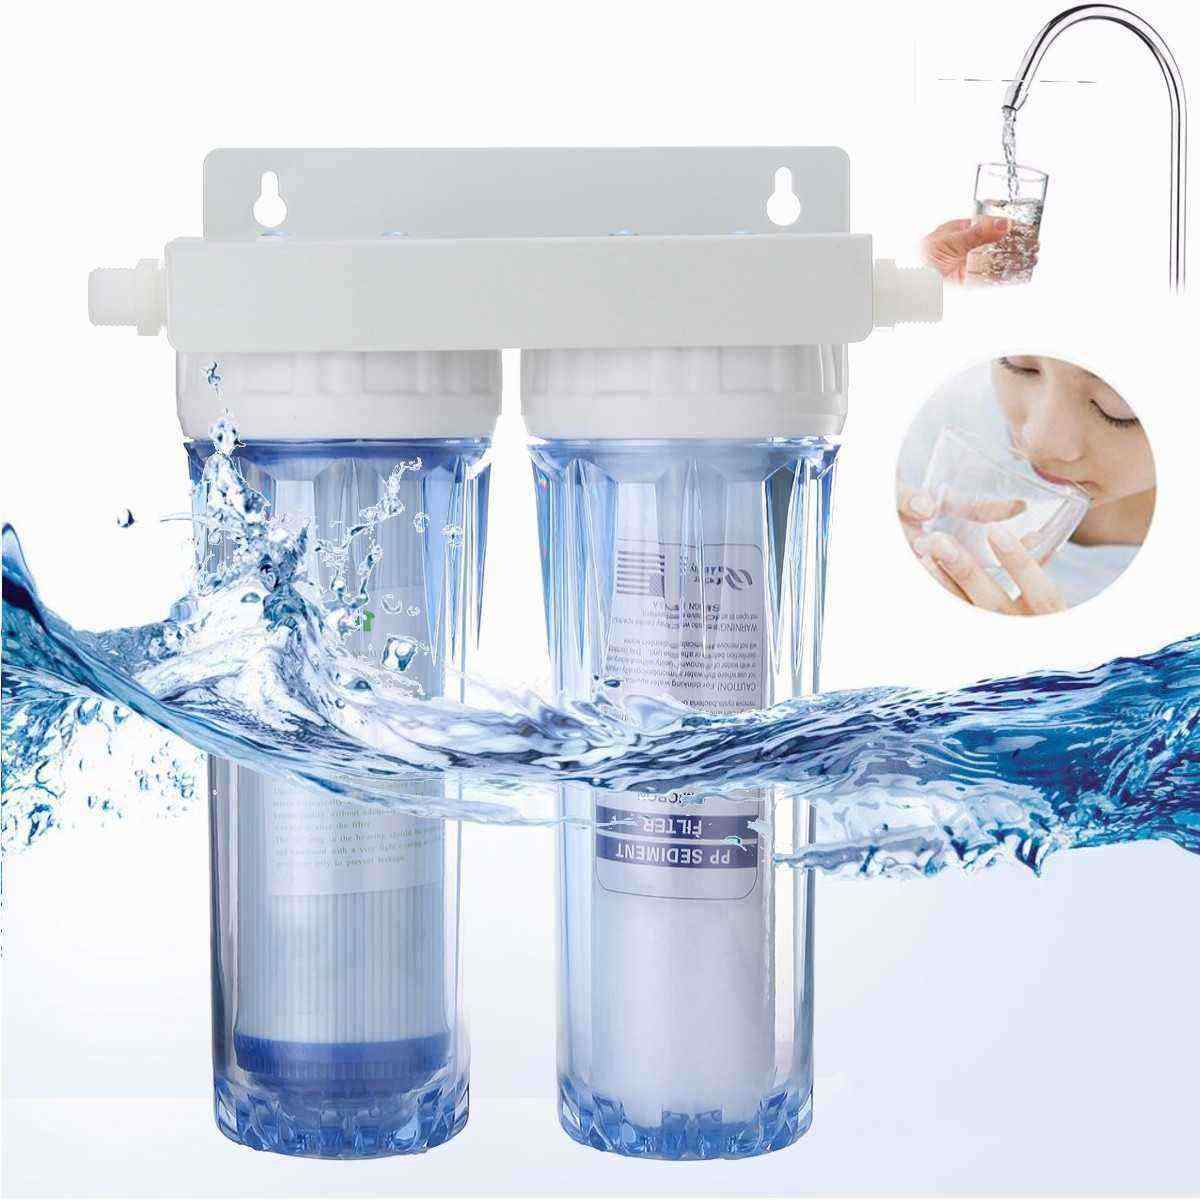 10quot-Dual-Dual-Reverse-Osmosis-Faucet-Tap-Water-Filter-Health-Purifier-Cartridge-Home-Kitchen-1123791